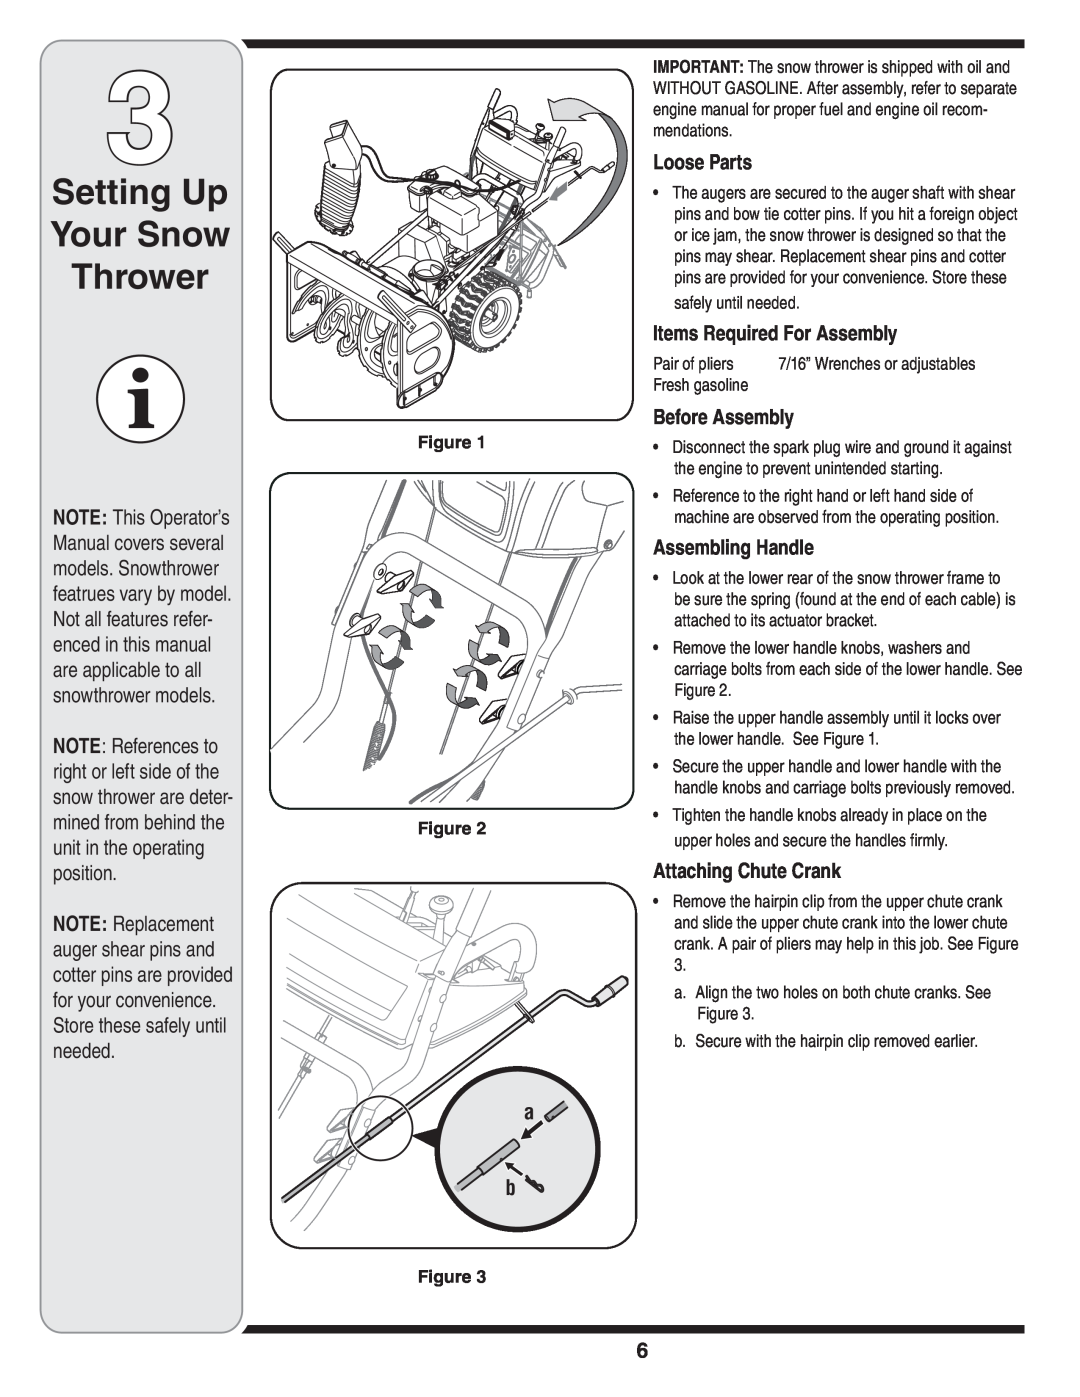 MTD 769-03342 Setting Up Your Snow Thrower, Loose Parts, Items Required For Assembly, Before Assembly, Assembling Handle 